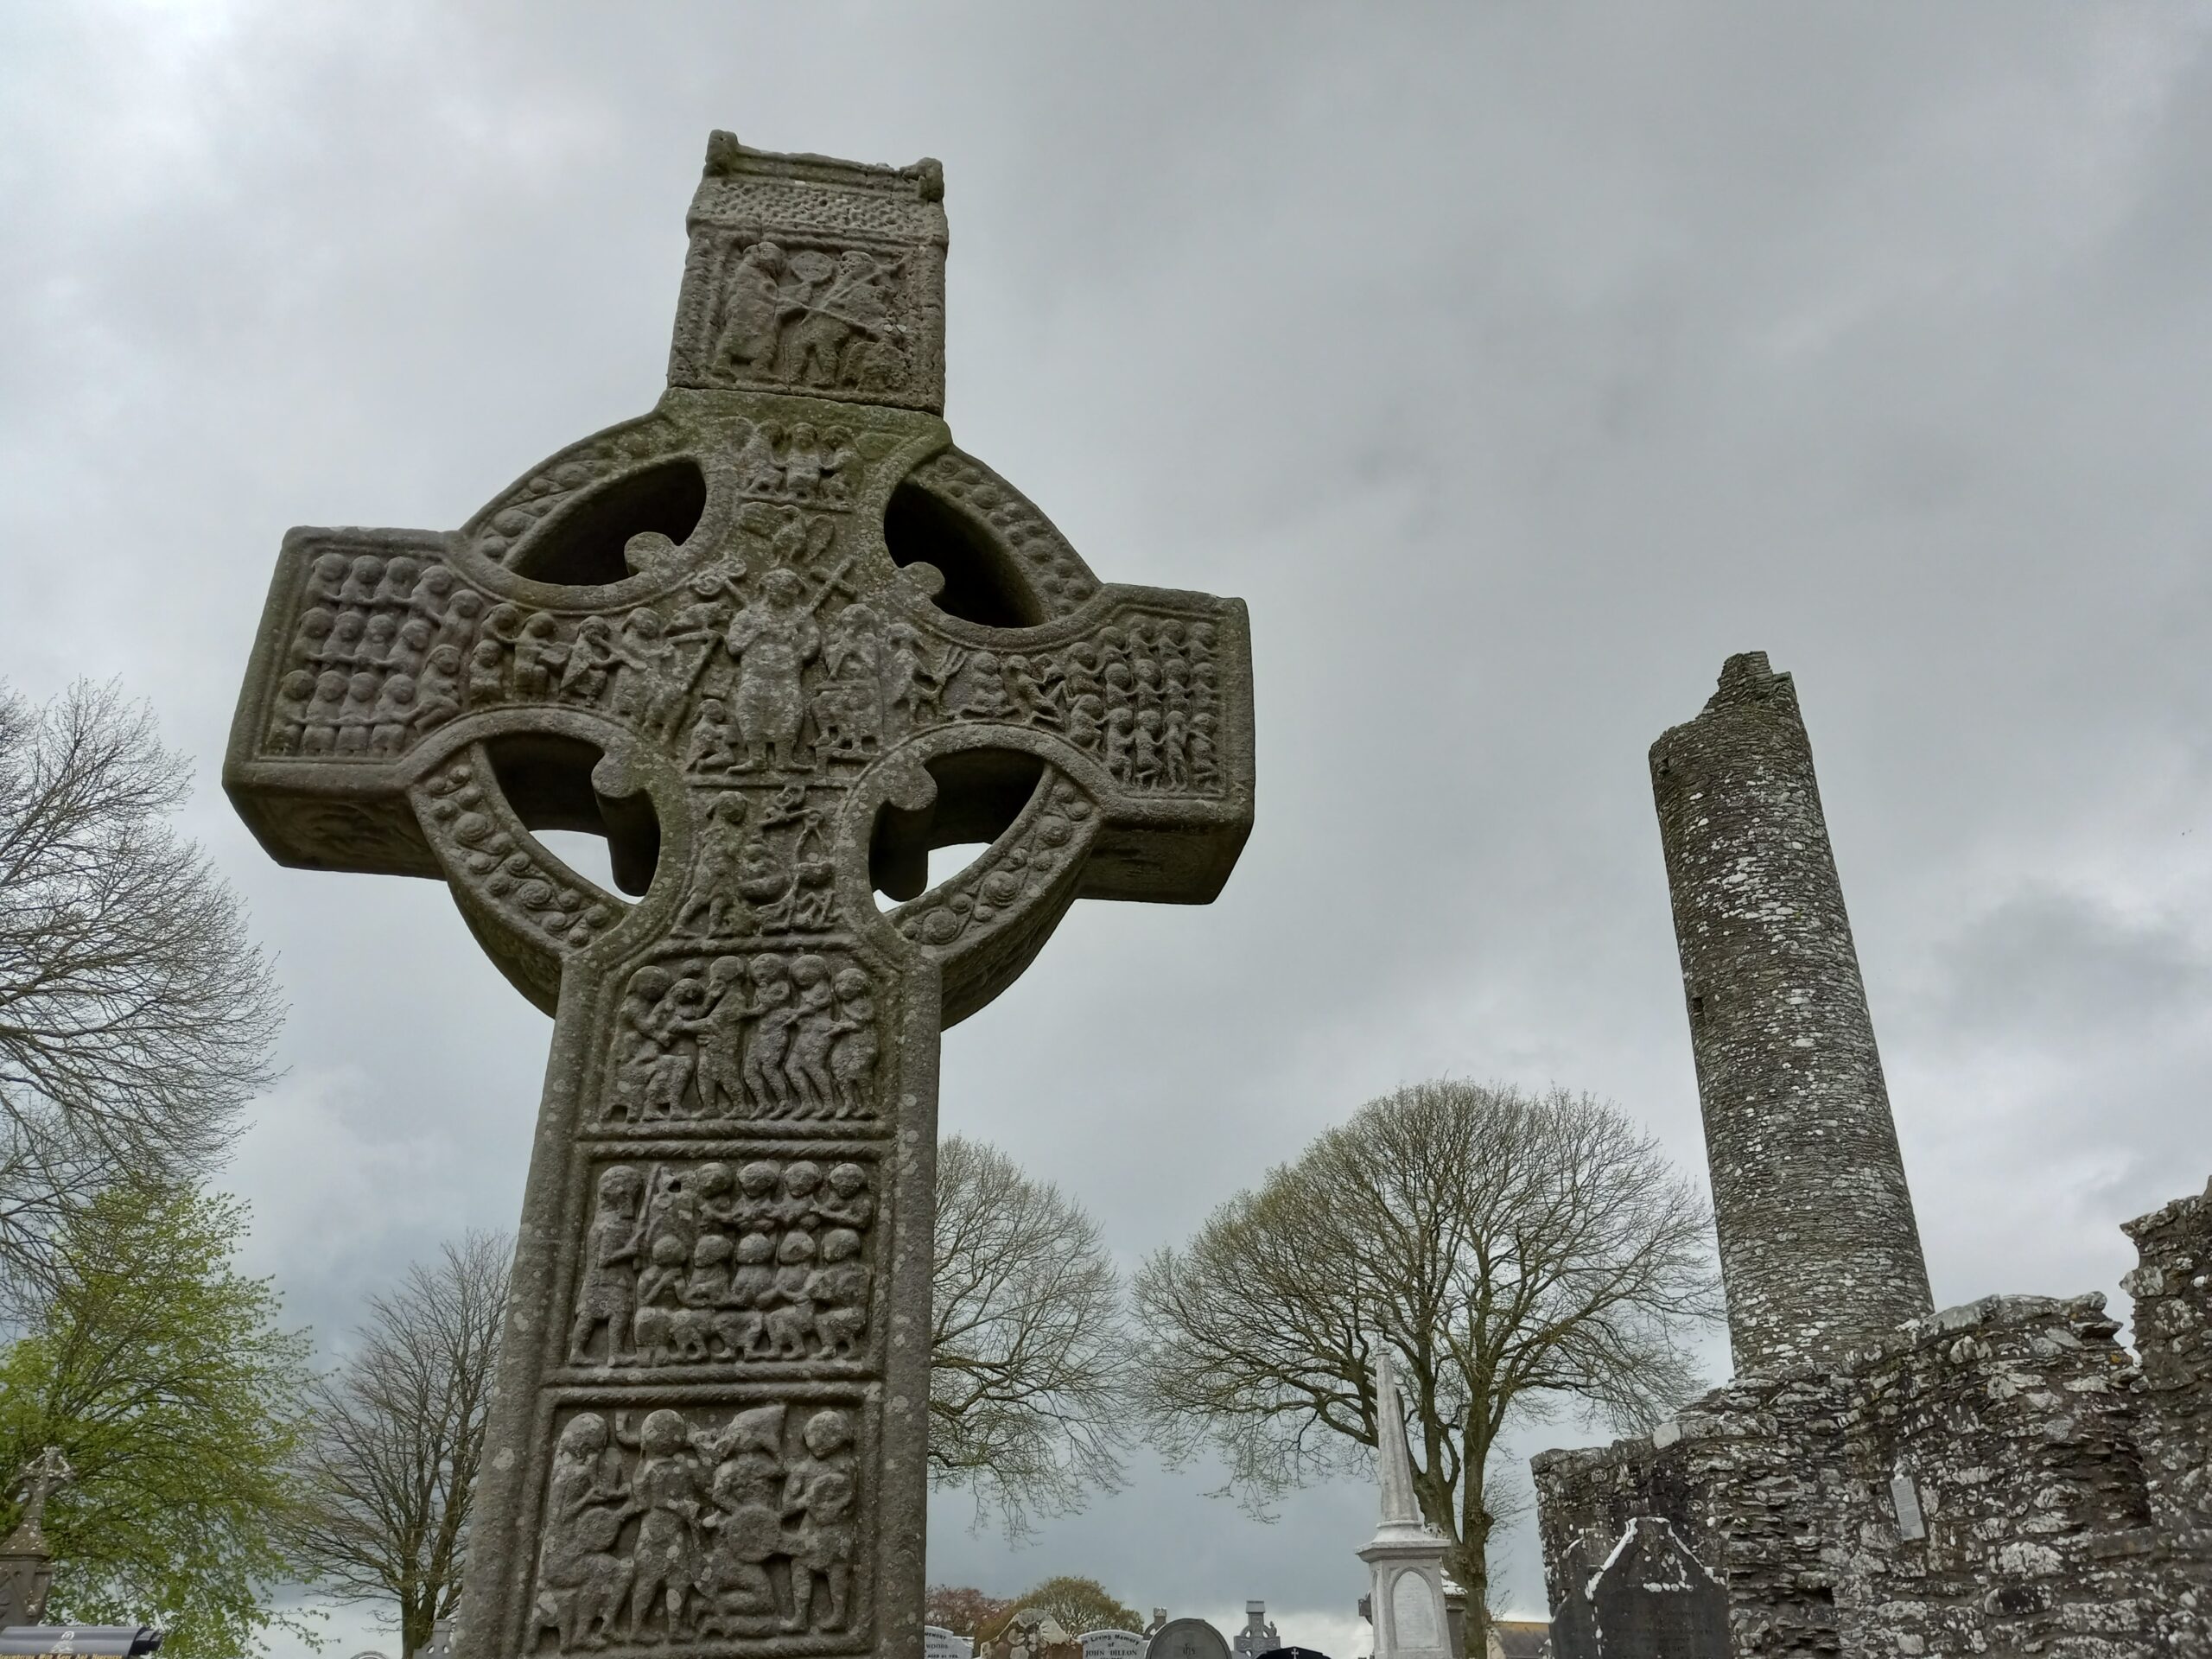 Elements of Monasterboice: Muiredach's High Cross, round tower, stone church walls, modern grave markers. Photograph by the author.